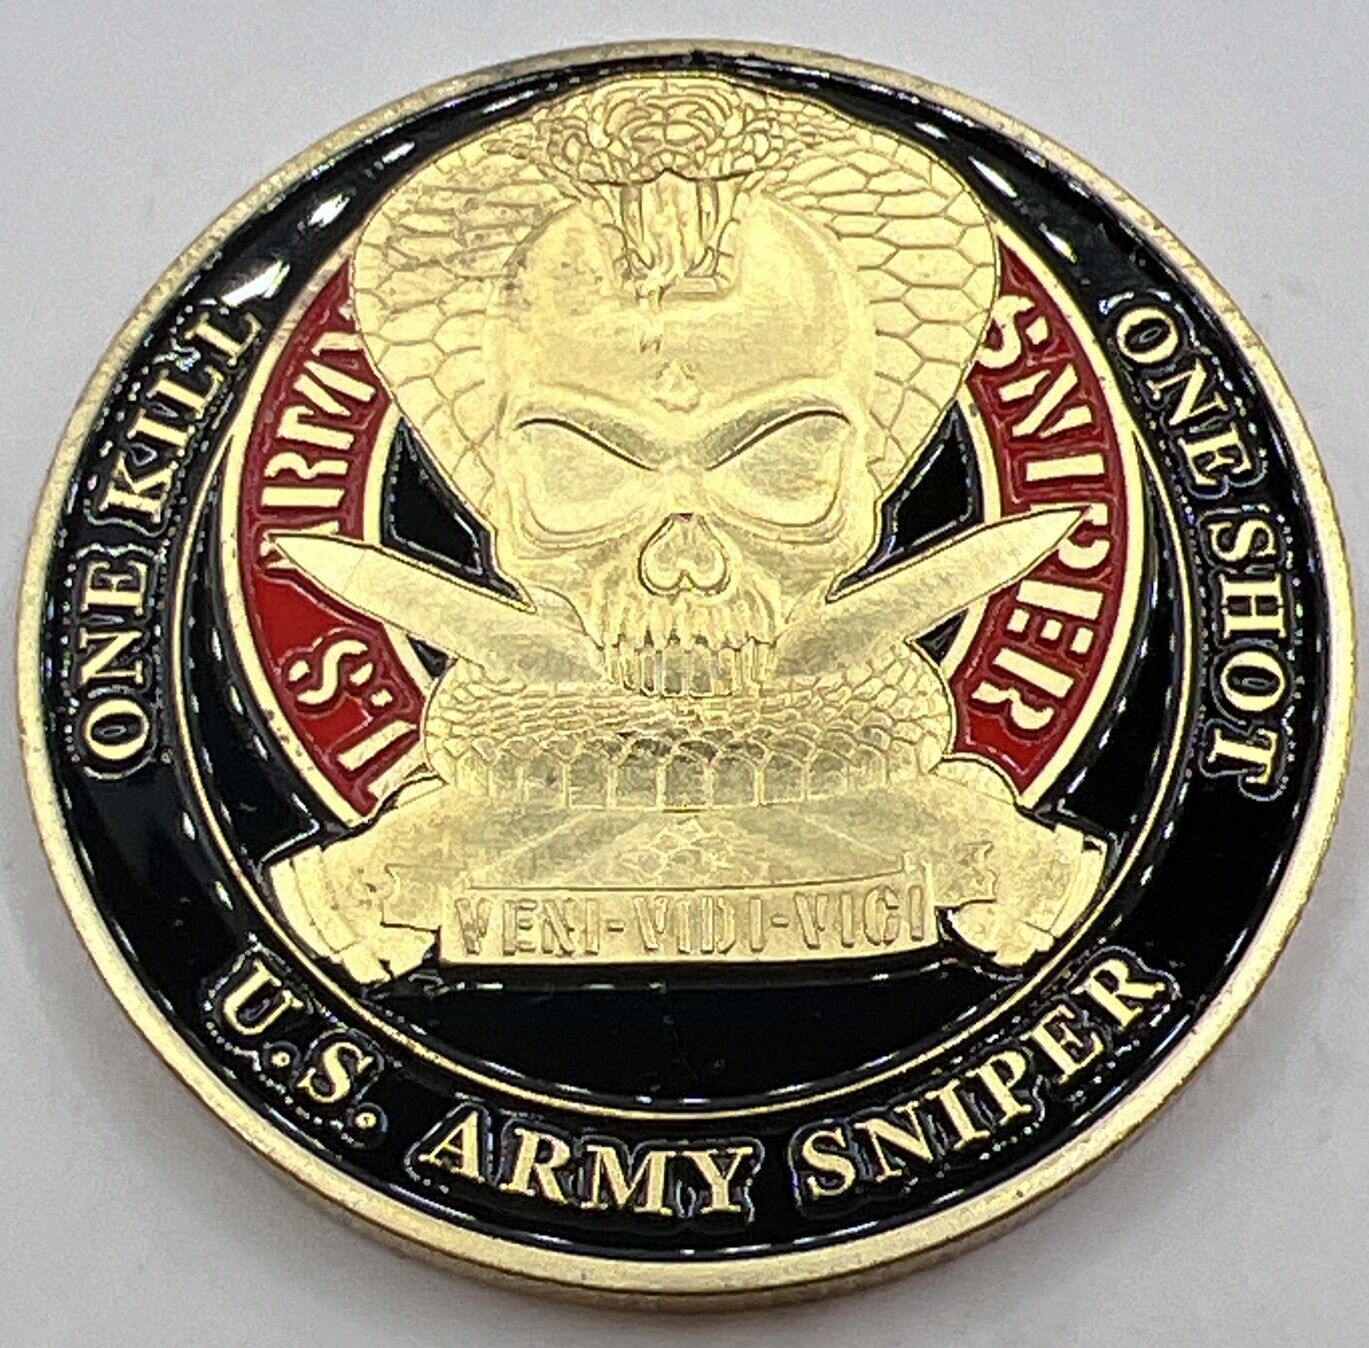 * RARE US ARMY SNIPER COIN ONE SHOT AND ONE KILL ARMY PROUD NEW-CHALLENGE COIN